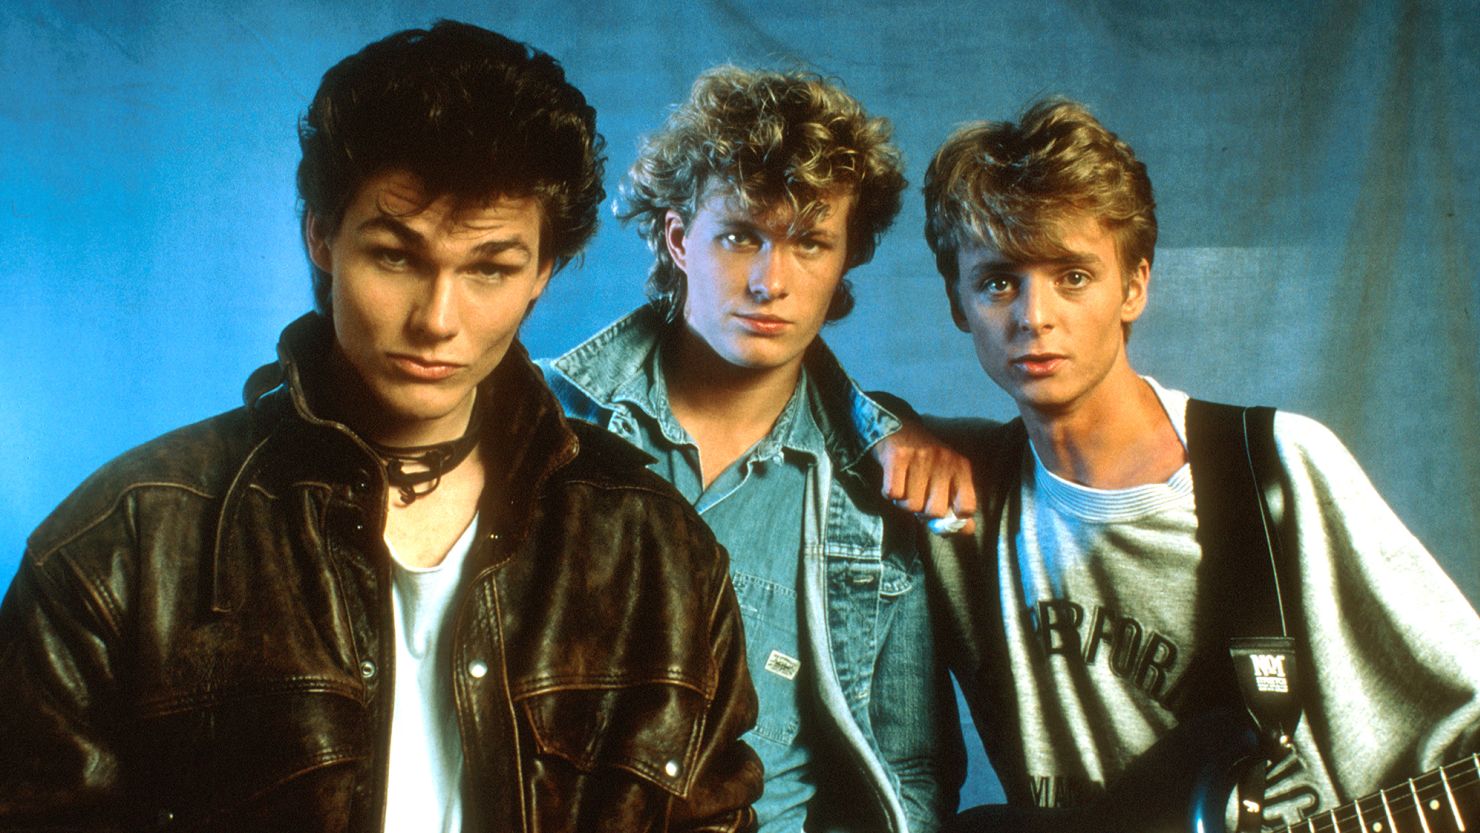 A-ha, the Norwegian synth-pop band, formed in Oslo in 1982.